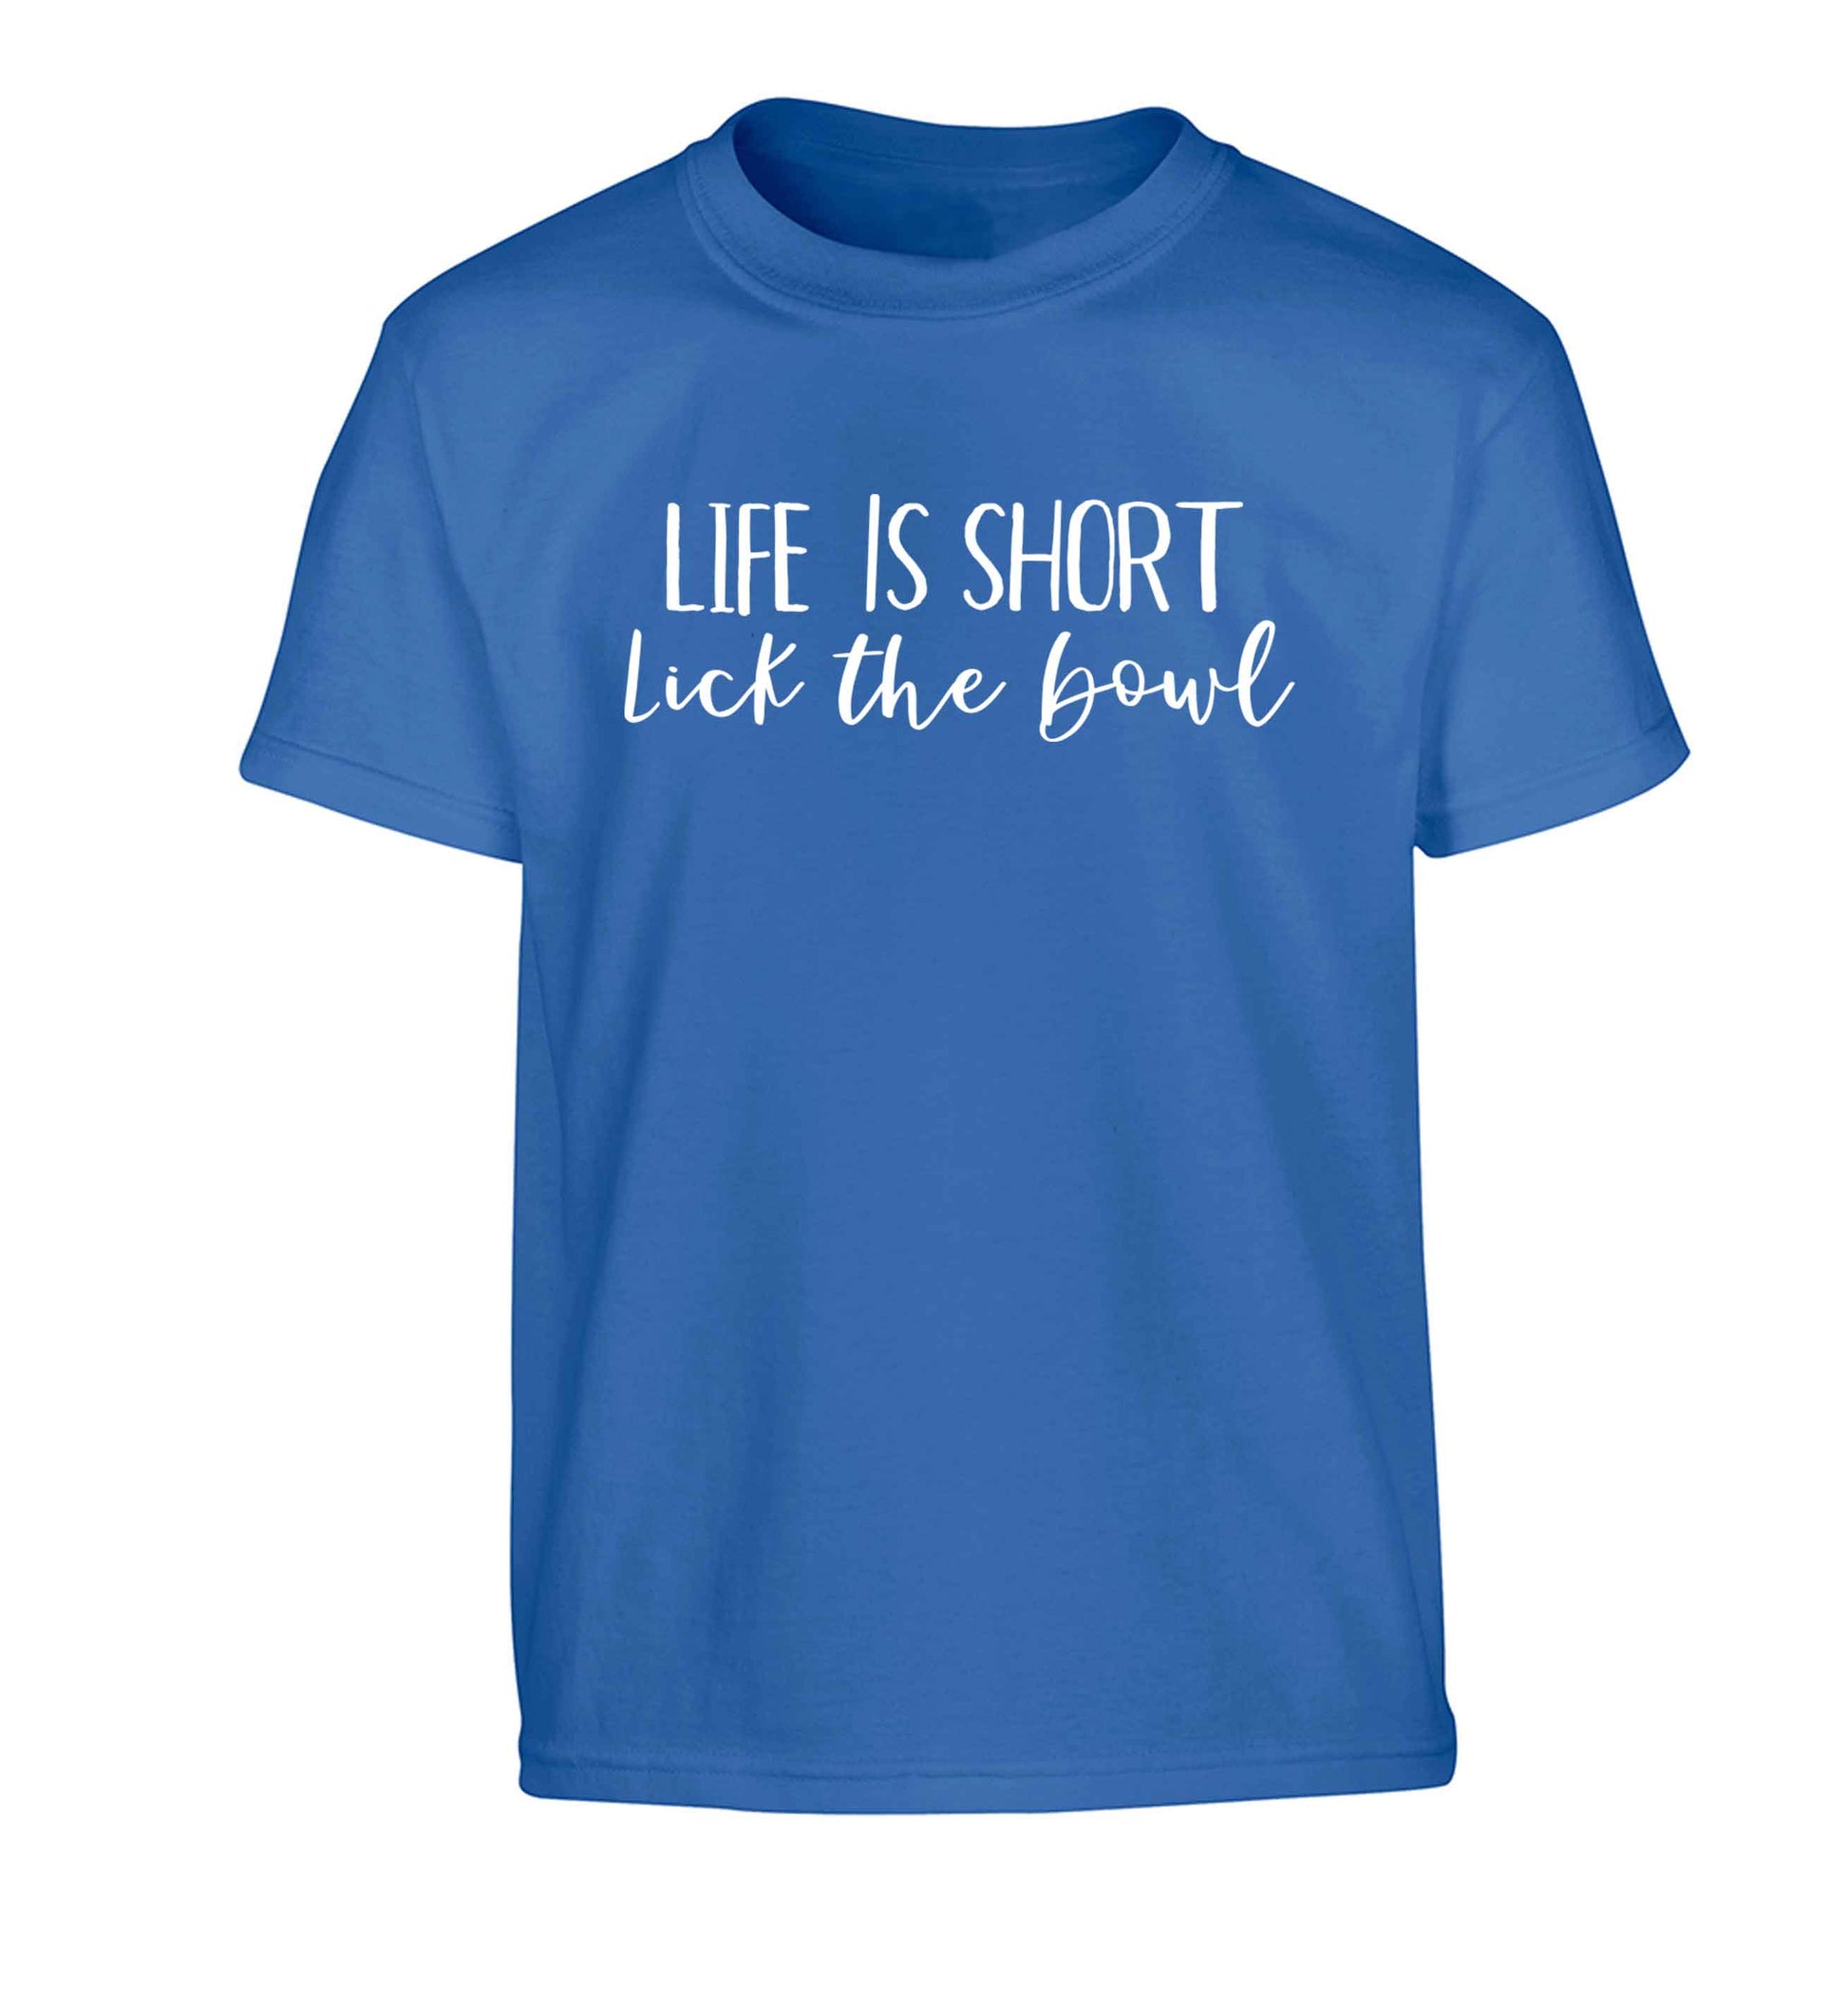 Life is short lick the bowl Children's blue Tshirt 12-13 Years